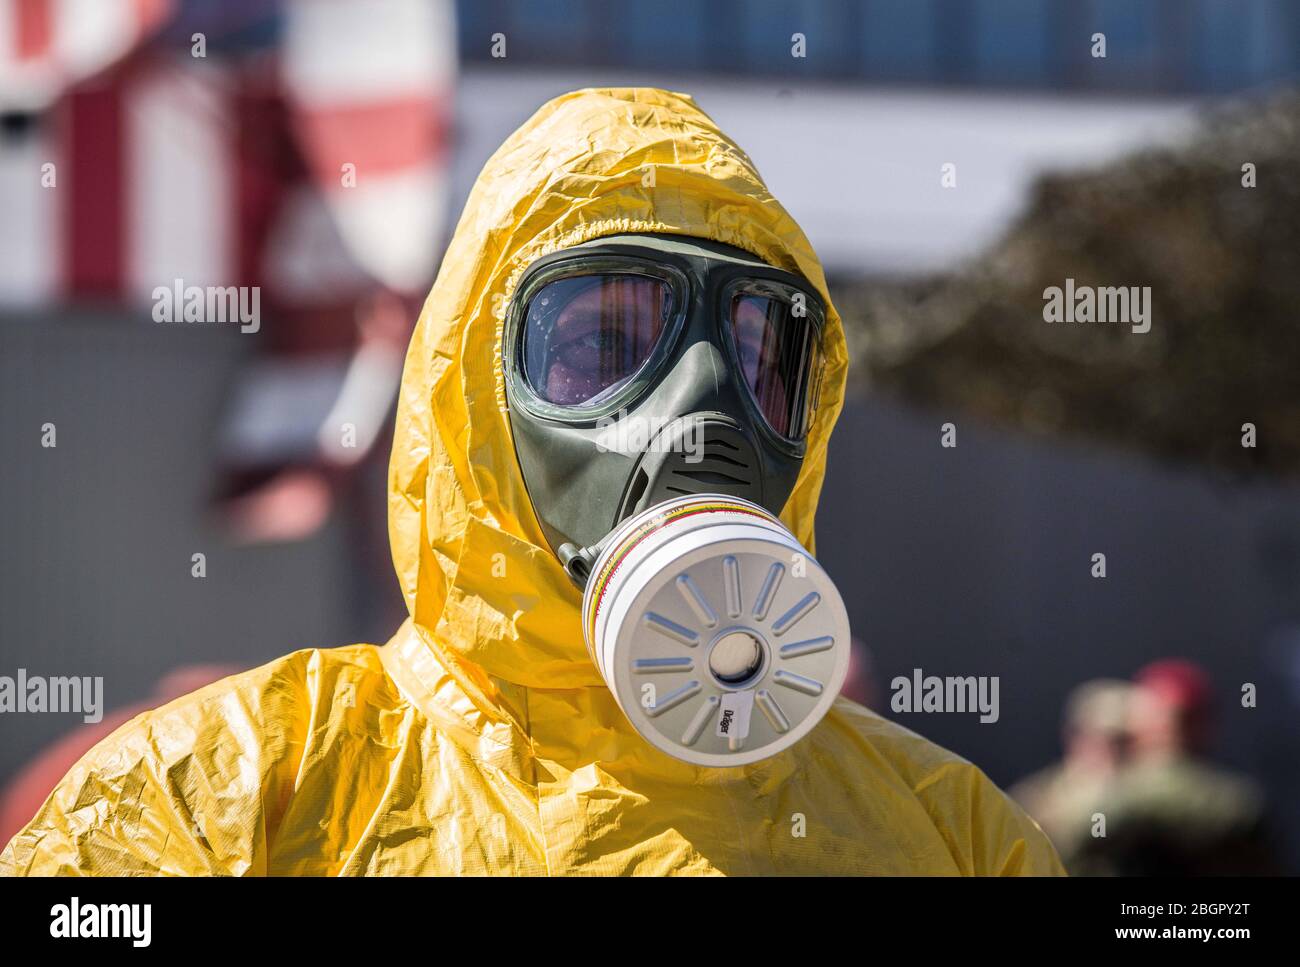 Neubiberg Bei Muenchen, Bavaria, Germany. 22nd Apr, 2020. German Bundeswehr soldiers wear gas masks and Dupint TyChem C protective clothing while mixing the constituents together to make Oxicide, a surface disinfectant used in the fight against Coronavirus. Germany is currently at 148,174 positive diagnoses with 4,961 deaths. Credit: Sachelle Babbar/ZUMA Wire/Alamy Live News Stock Photo